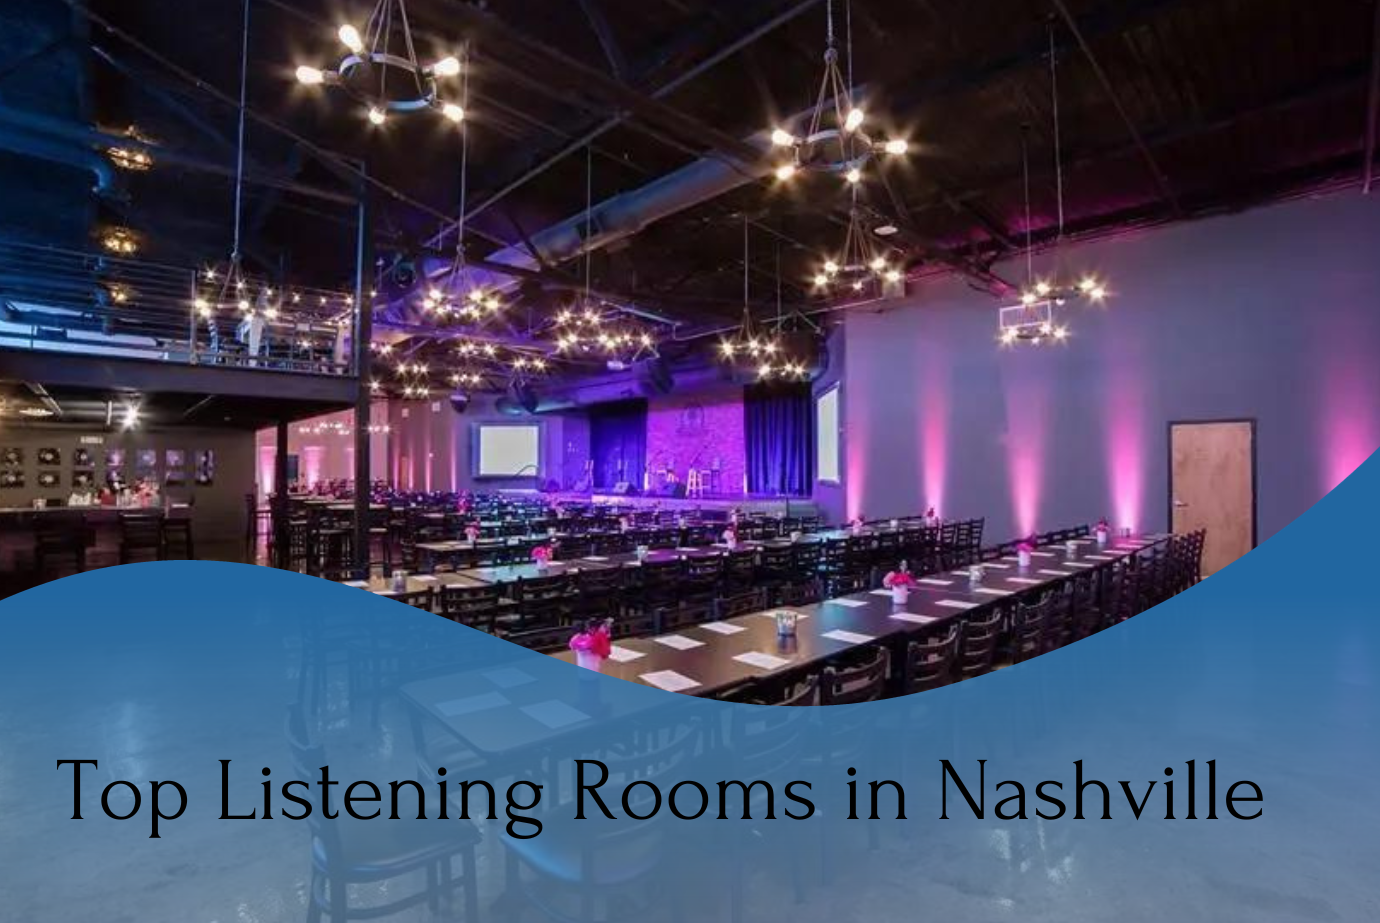 A place with few tables, chairs, colorful lights and a written of "Top Listening Rooms in Nashville".